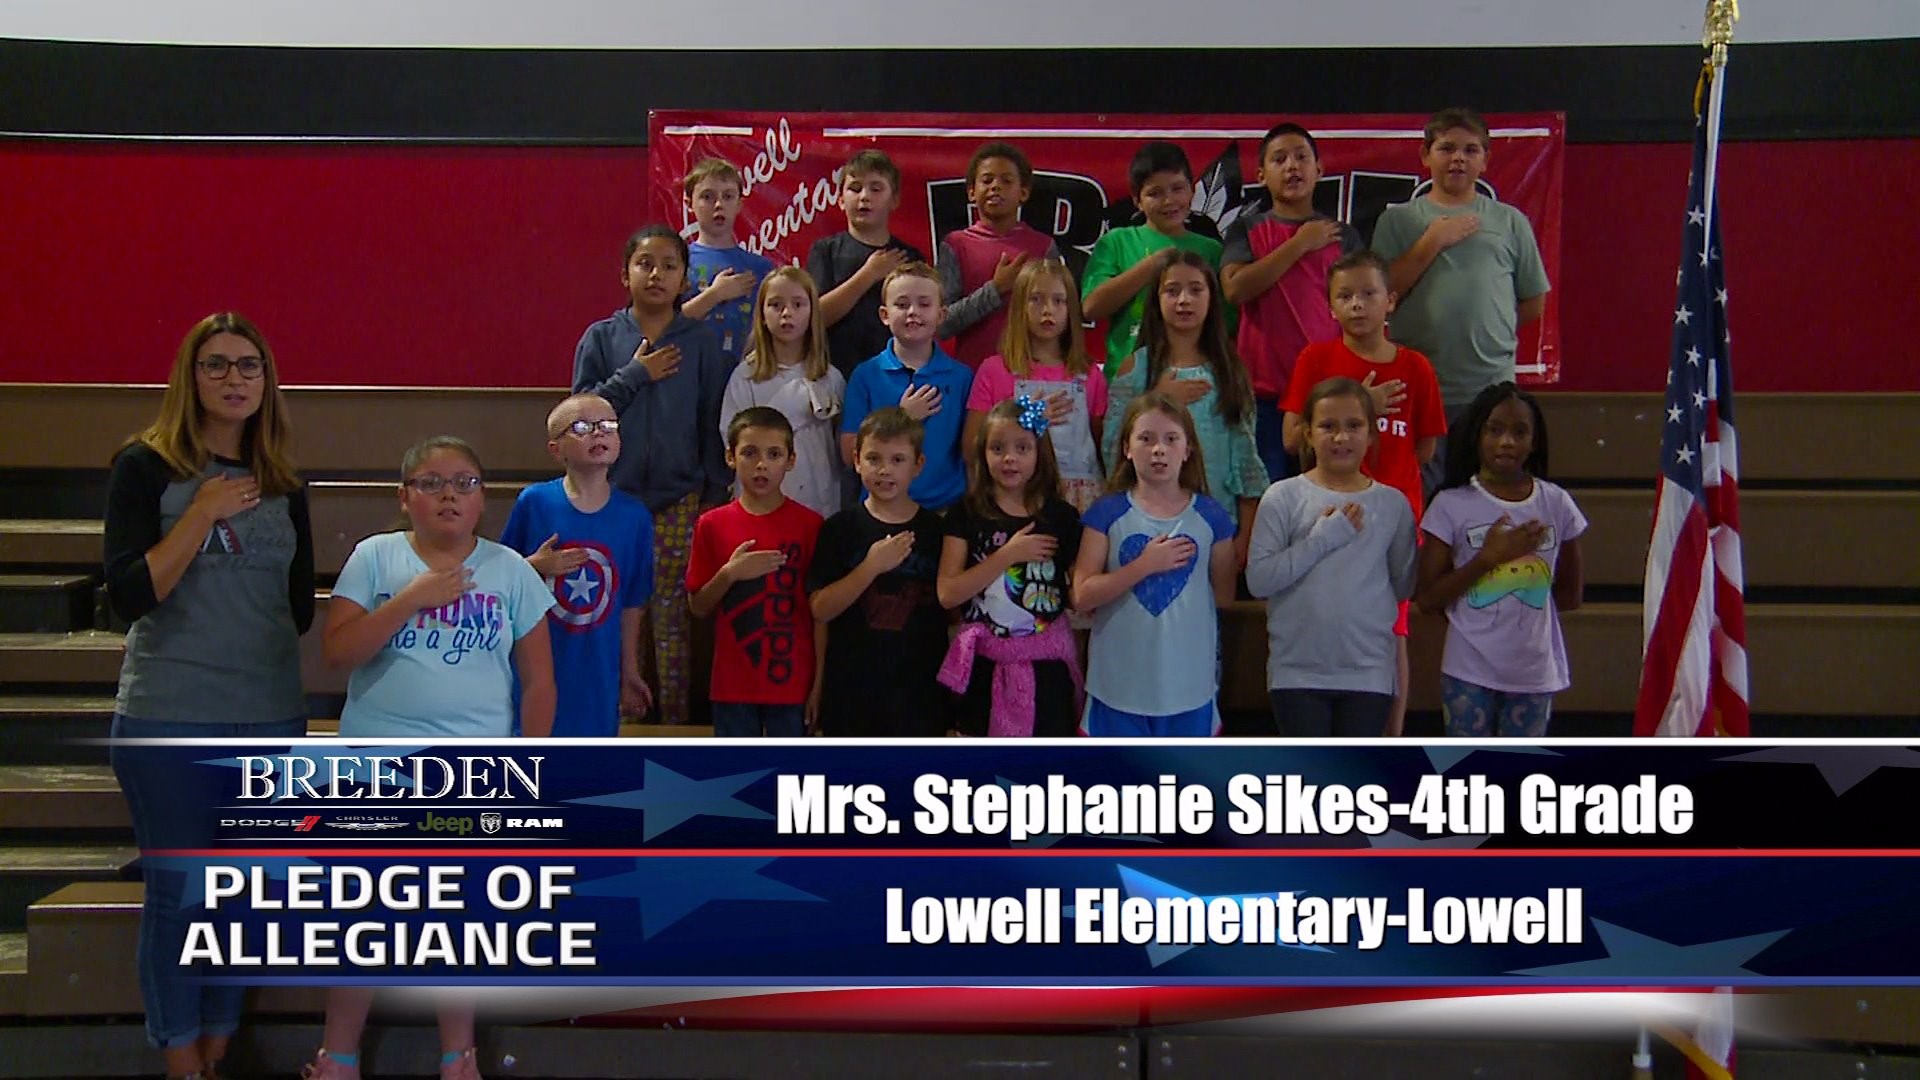 Mrs. Stephanie Sikes  4th Grade Lowell Elementary, Lowell